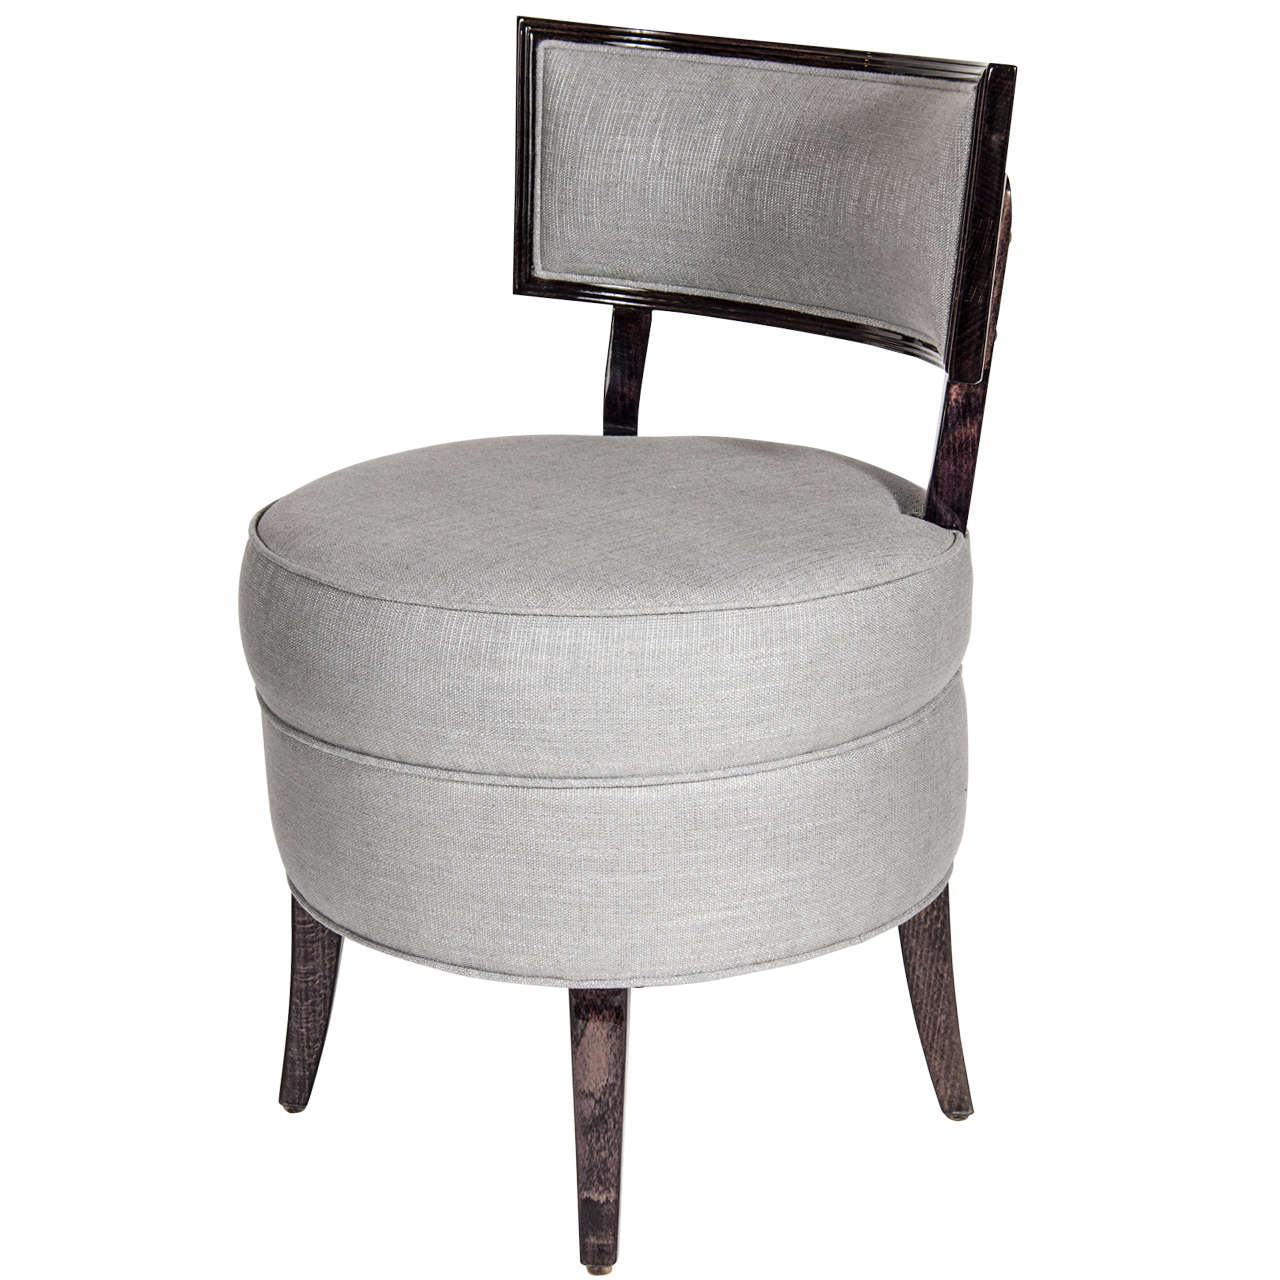 Upholstered Vanity Chair With Back Off 63, Vanity Chairs With Backs For Bathroom